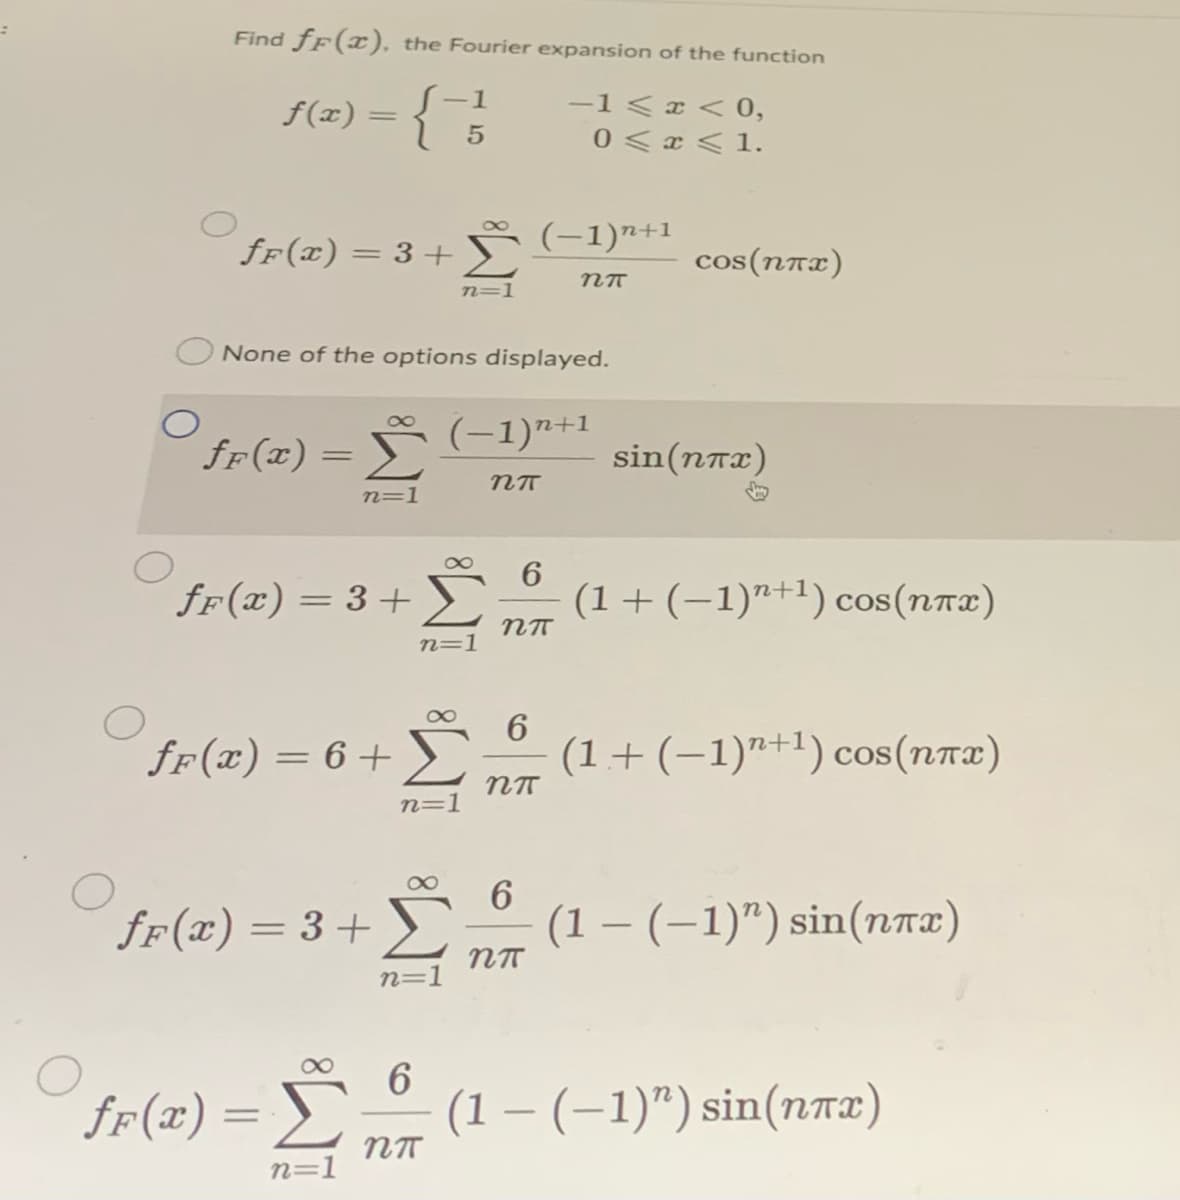 Find fF(x), the Fourier expansion of the function
f(x) =
-1
-1<x < 0,
||
0 <x < 1.
8
fF(x) = 3+
(-1)7+1
cos(nnx)
n=1
None of the options displayed.
8
fr(x) = Š (-1)n+1
sin(nrx)
n=1
6.
fr(x) = 3+>
Σ
(1+(-1)"+1) cos(nr2)
n=1
fF(x) = 6+
(1+ (-1)"+1) cos(nrx)
n=1
ff(x) = 3+
6
(1 – (–1)") sin(nTx)
n=1
ff(x) = S
(1 – (–1)") sin(nTE)
n=1
